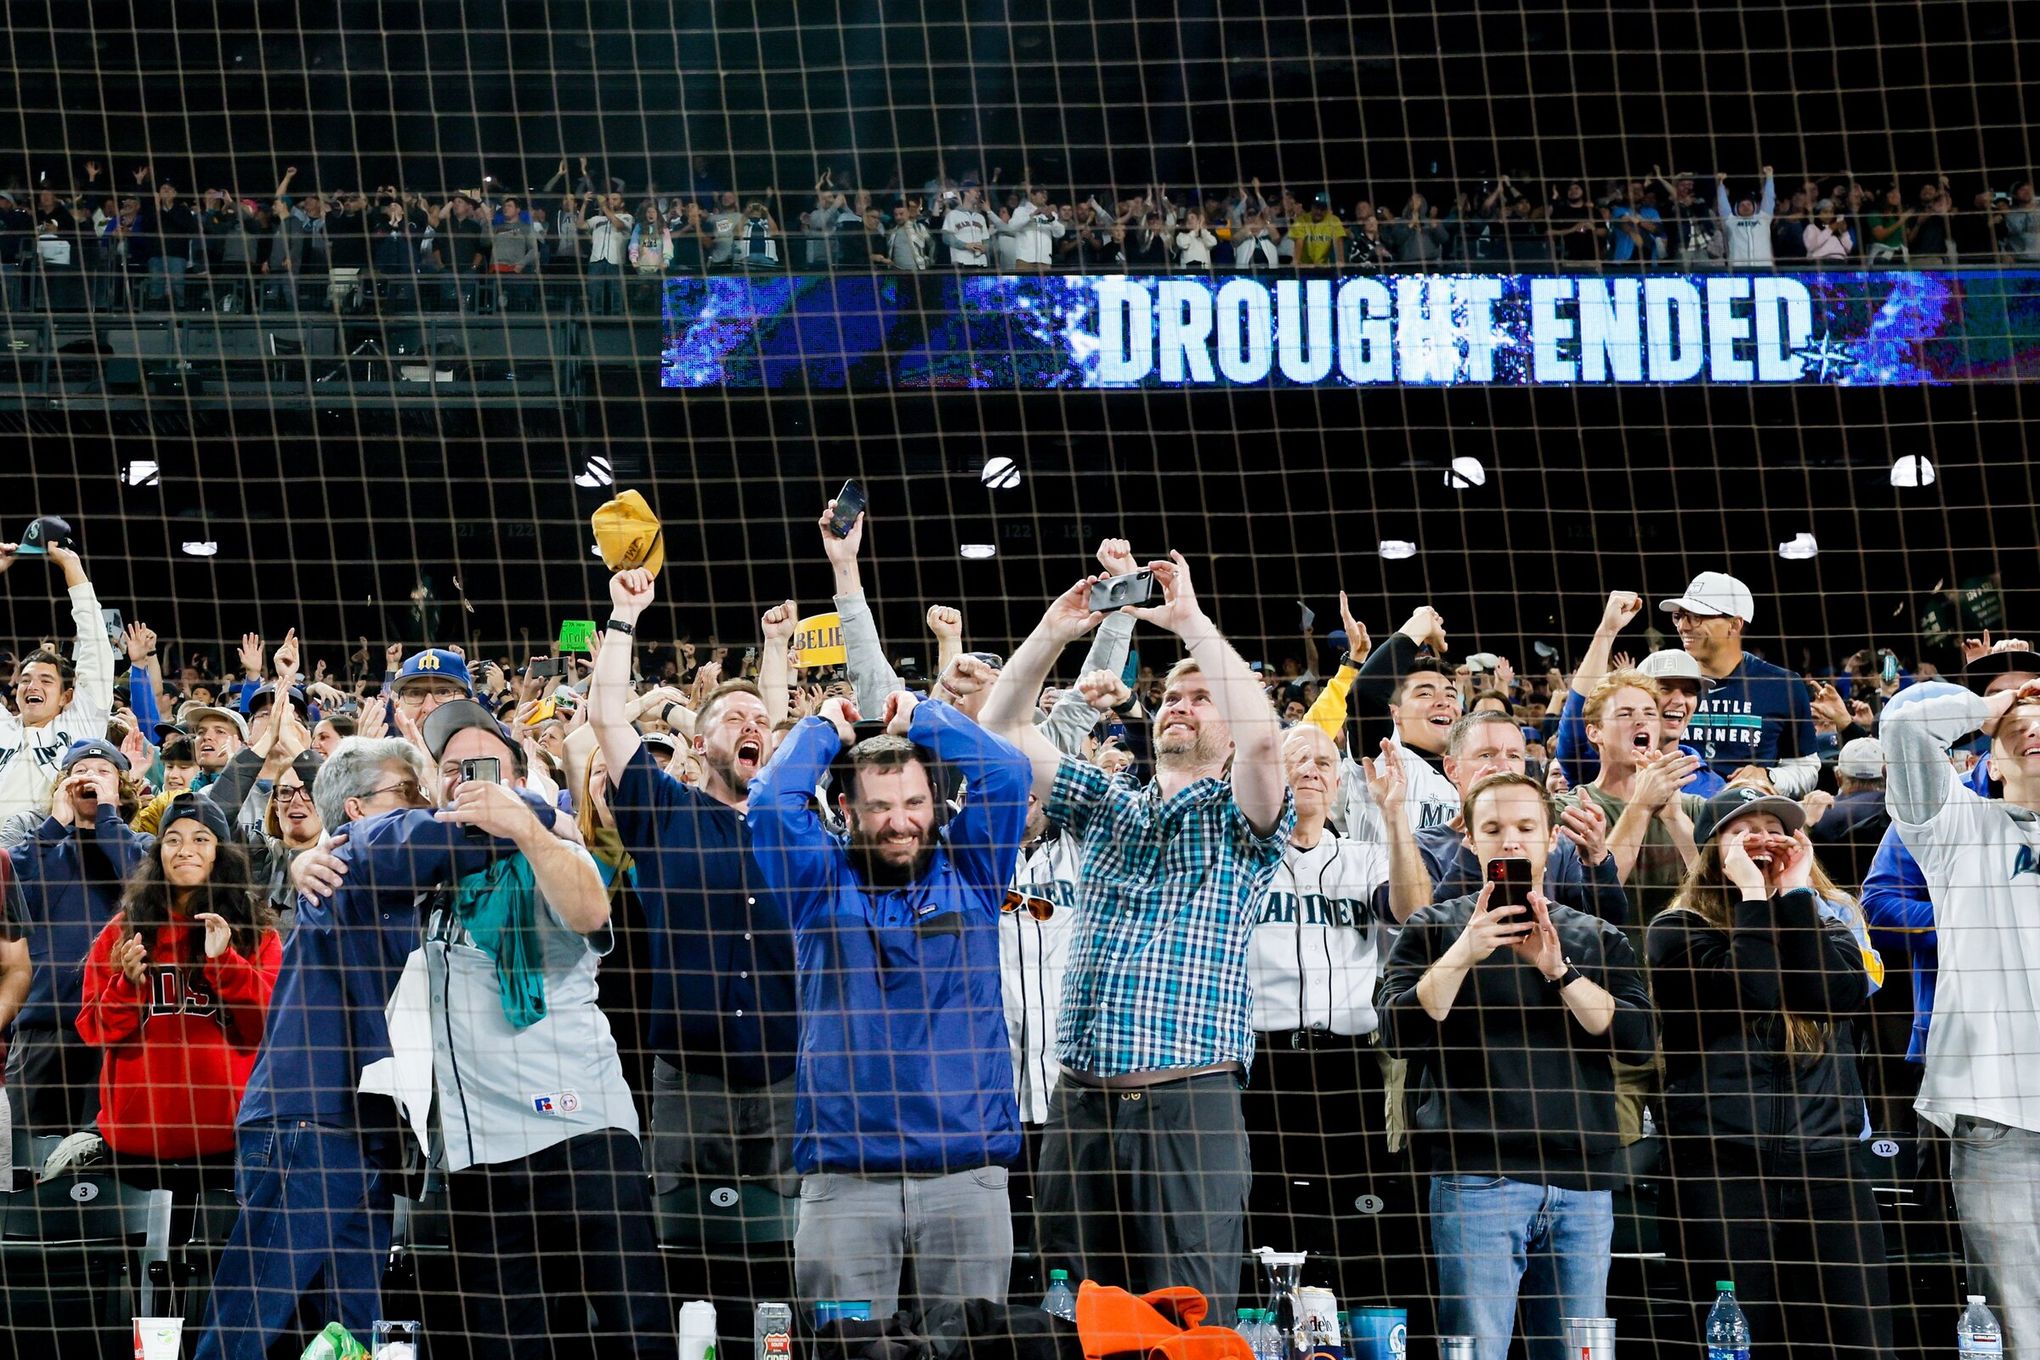 Mariners' fandom at an all-time high ahead of playoff appearance